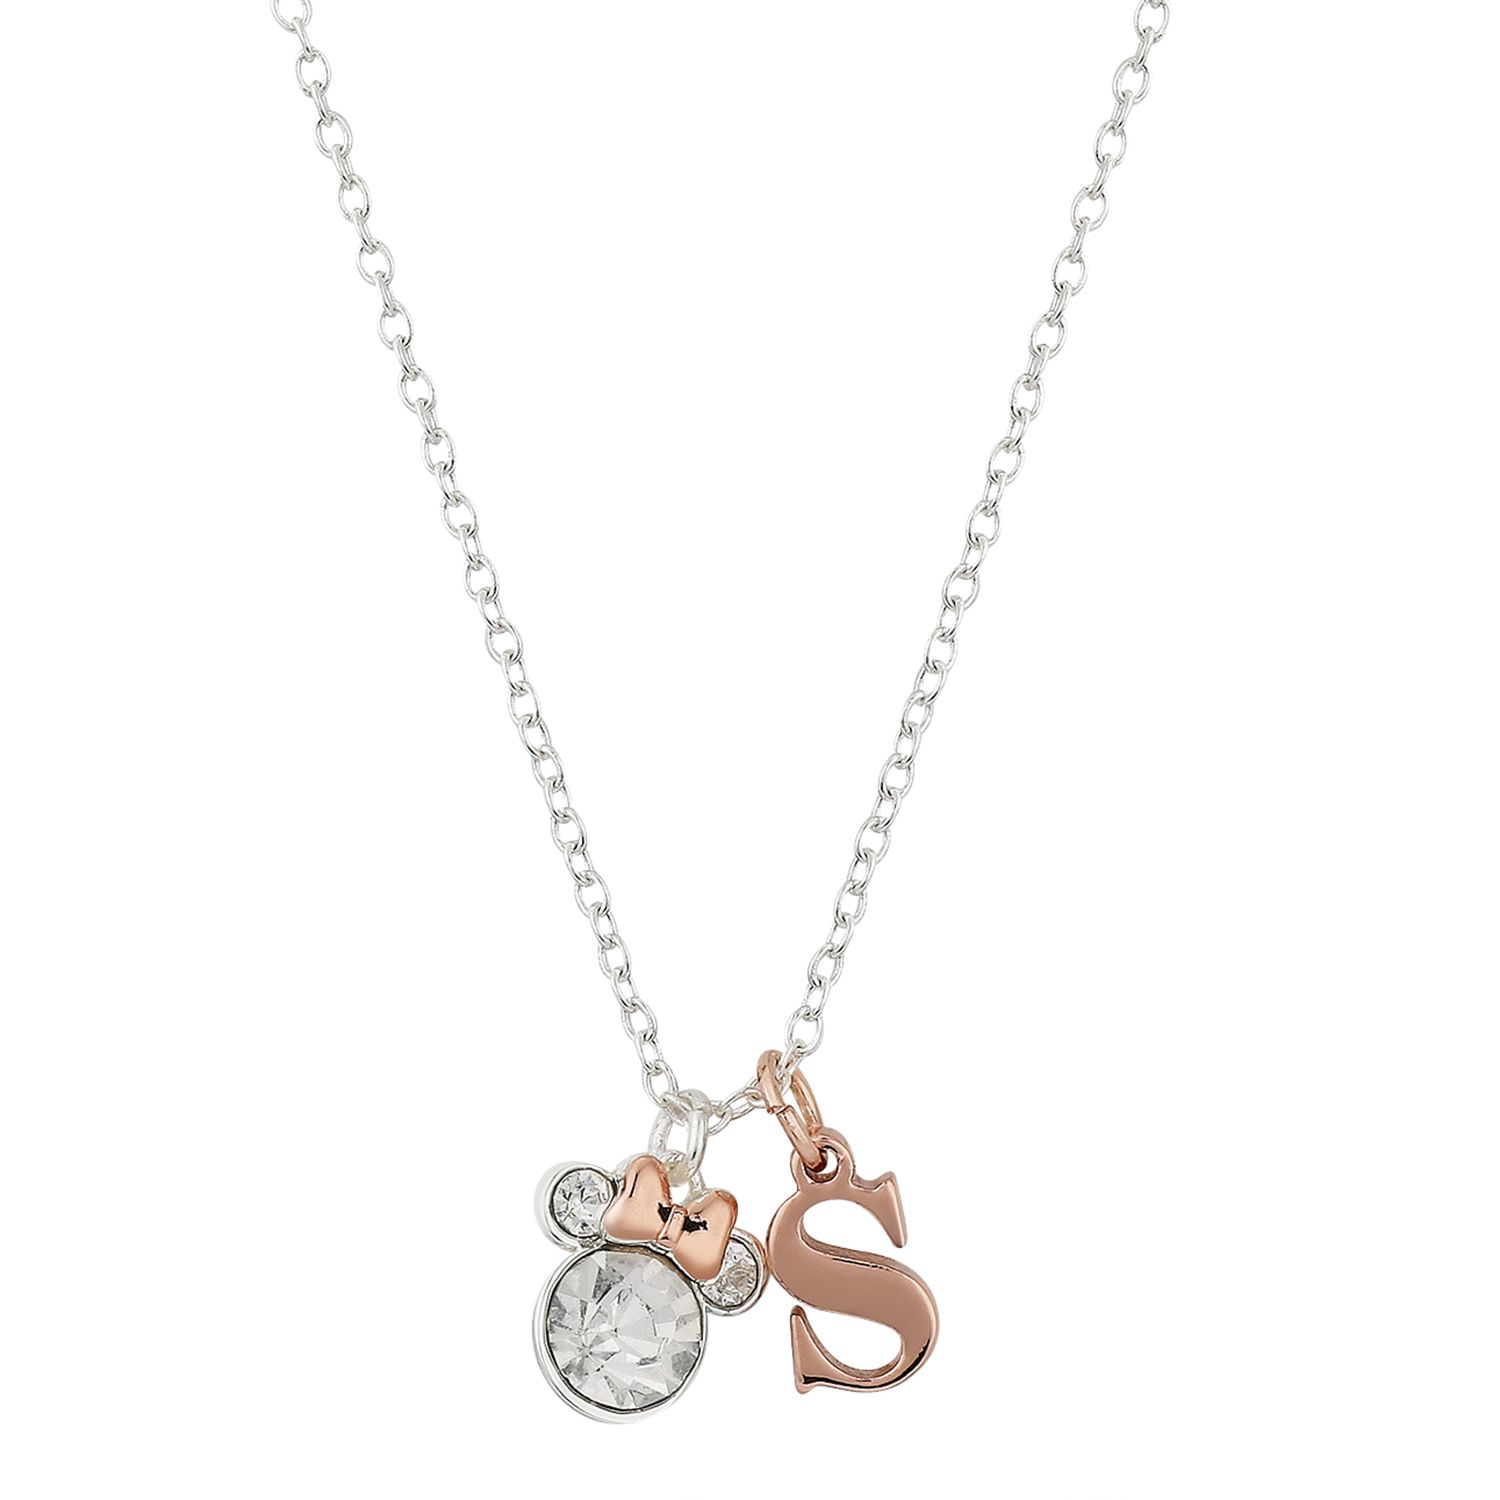 Image for Disney 's Minnie Mouse Head Two-Tone Initial Necklace at Kohl's.